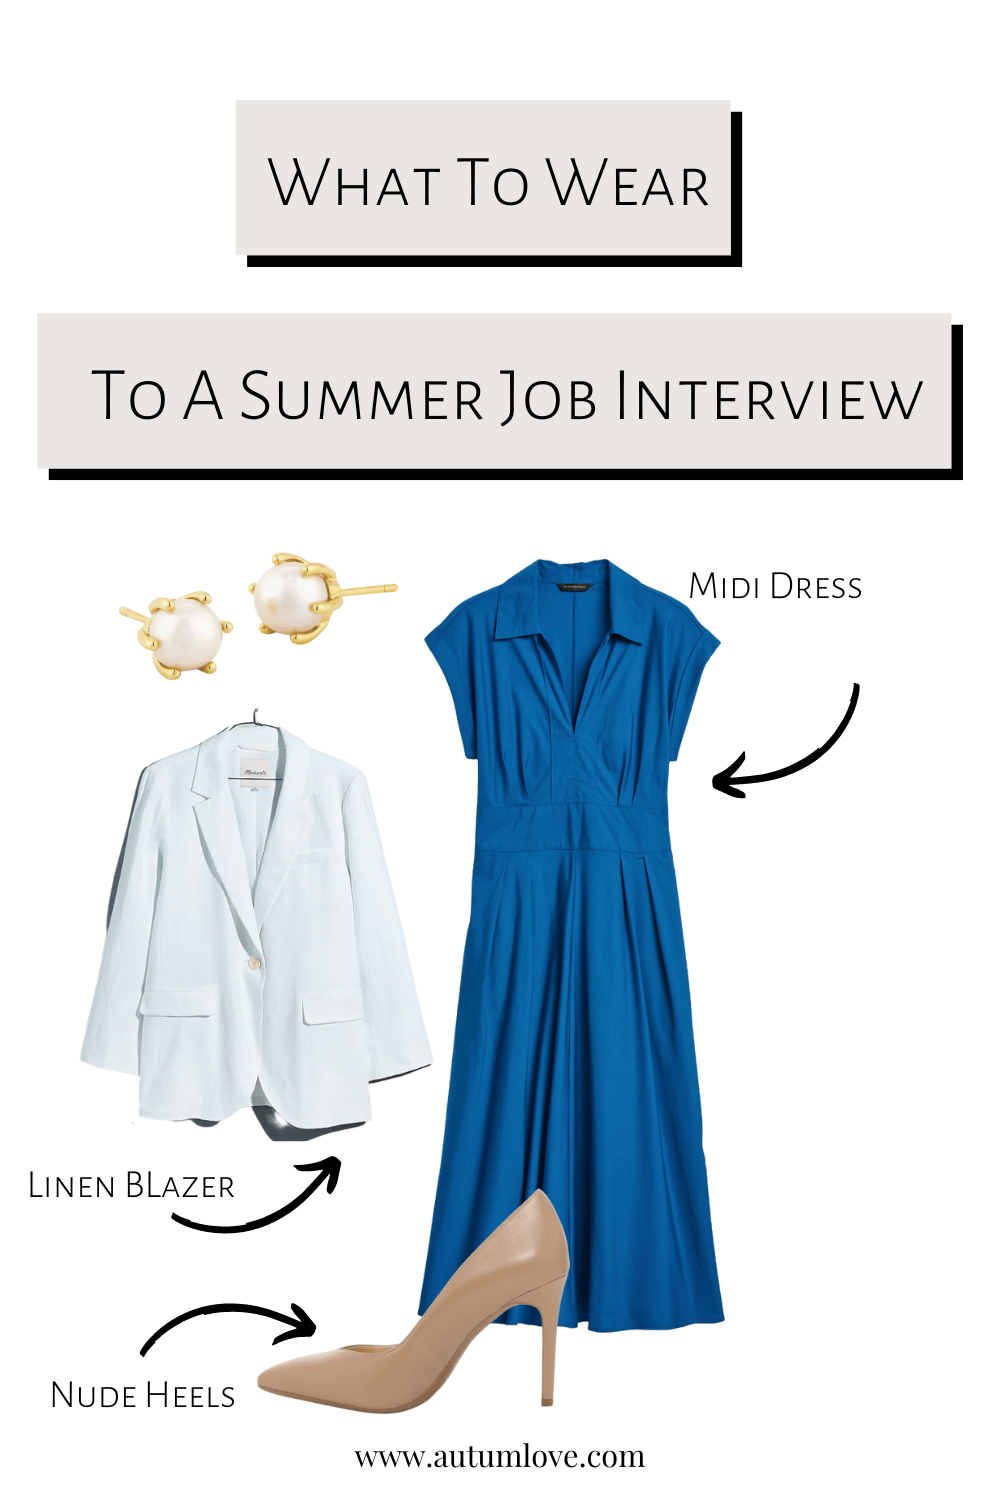 What kind of heels should I wear to an interview? - Quora